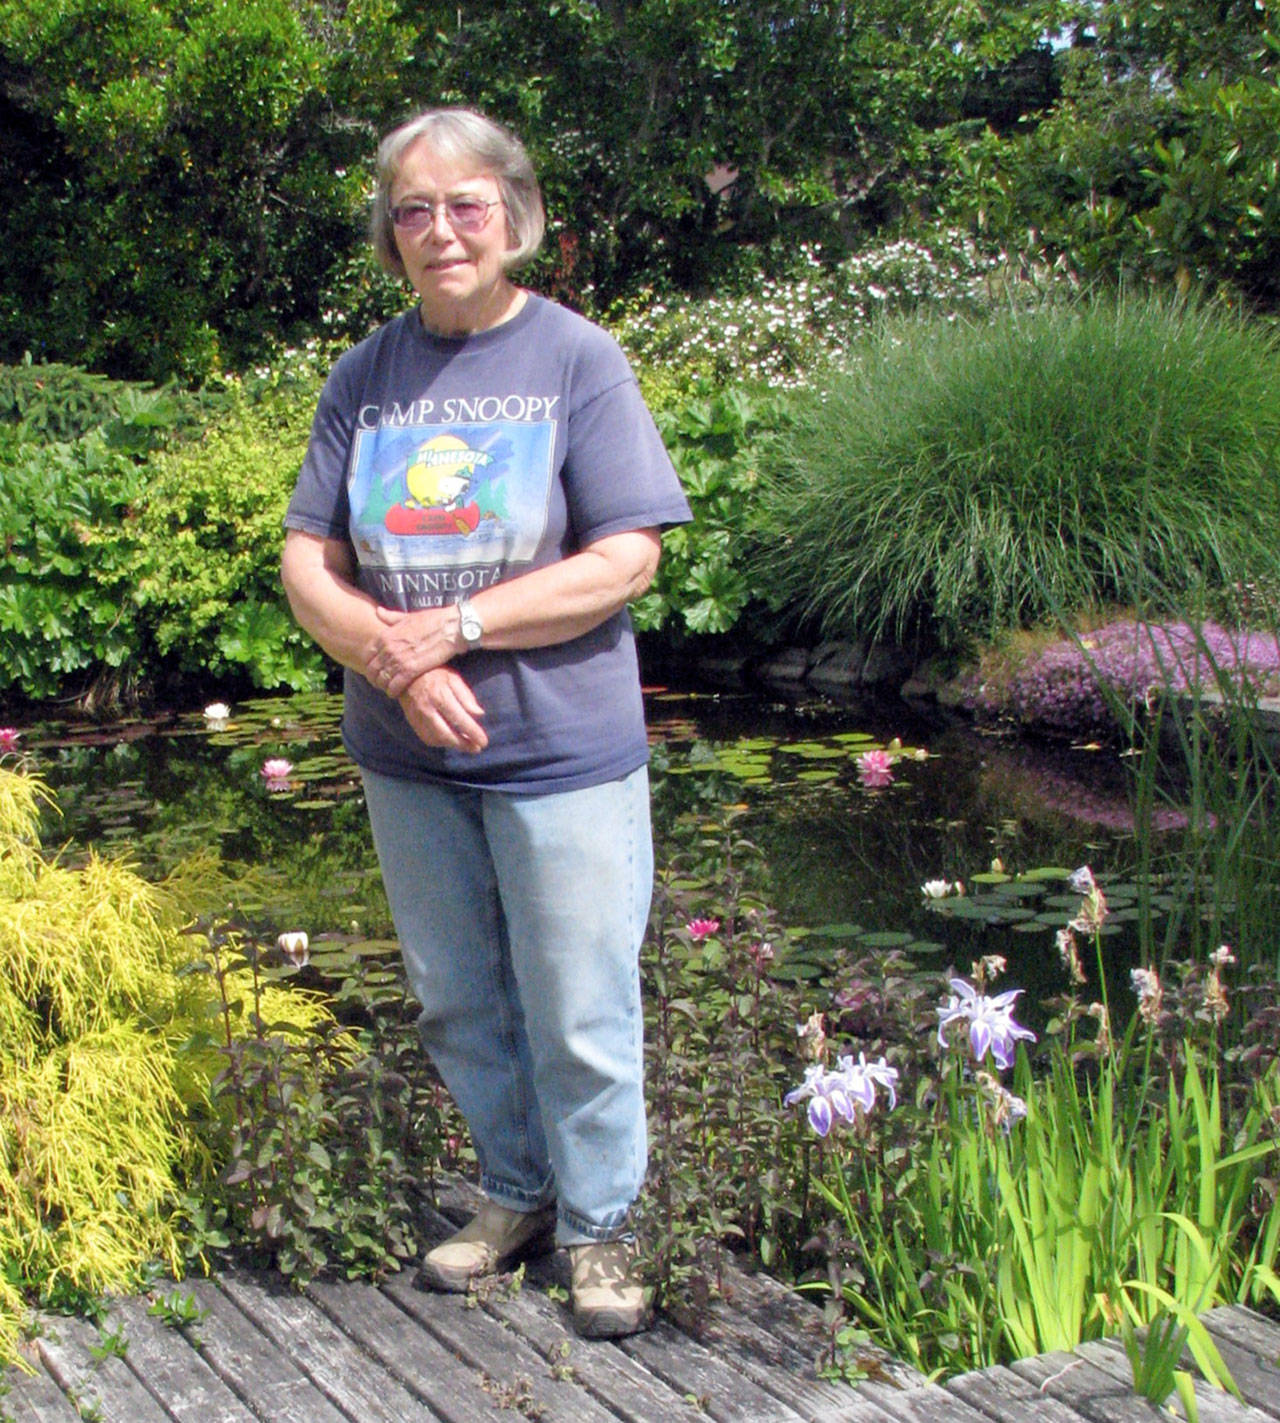 Roadhouse Nursery owner Jan Bahr will present “Think Before You Dig — Deciding What Kind of Water Feature You Want to Add to Your Garden” on Thursday. (Amanda Rosenberg)